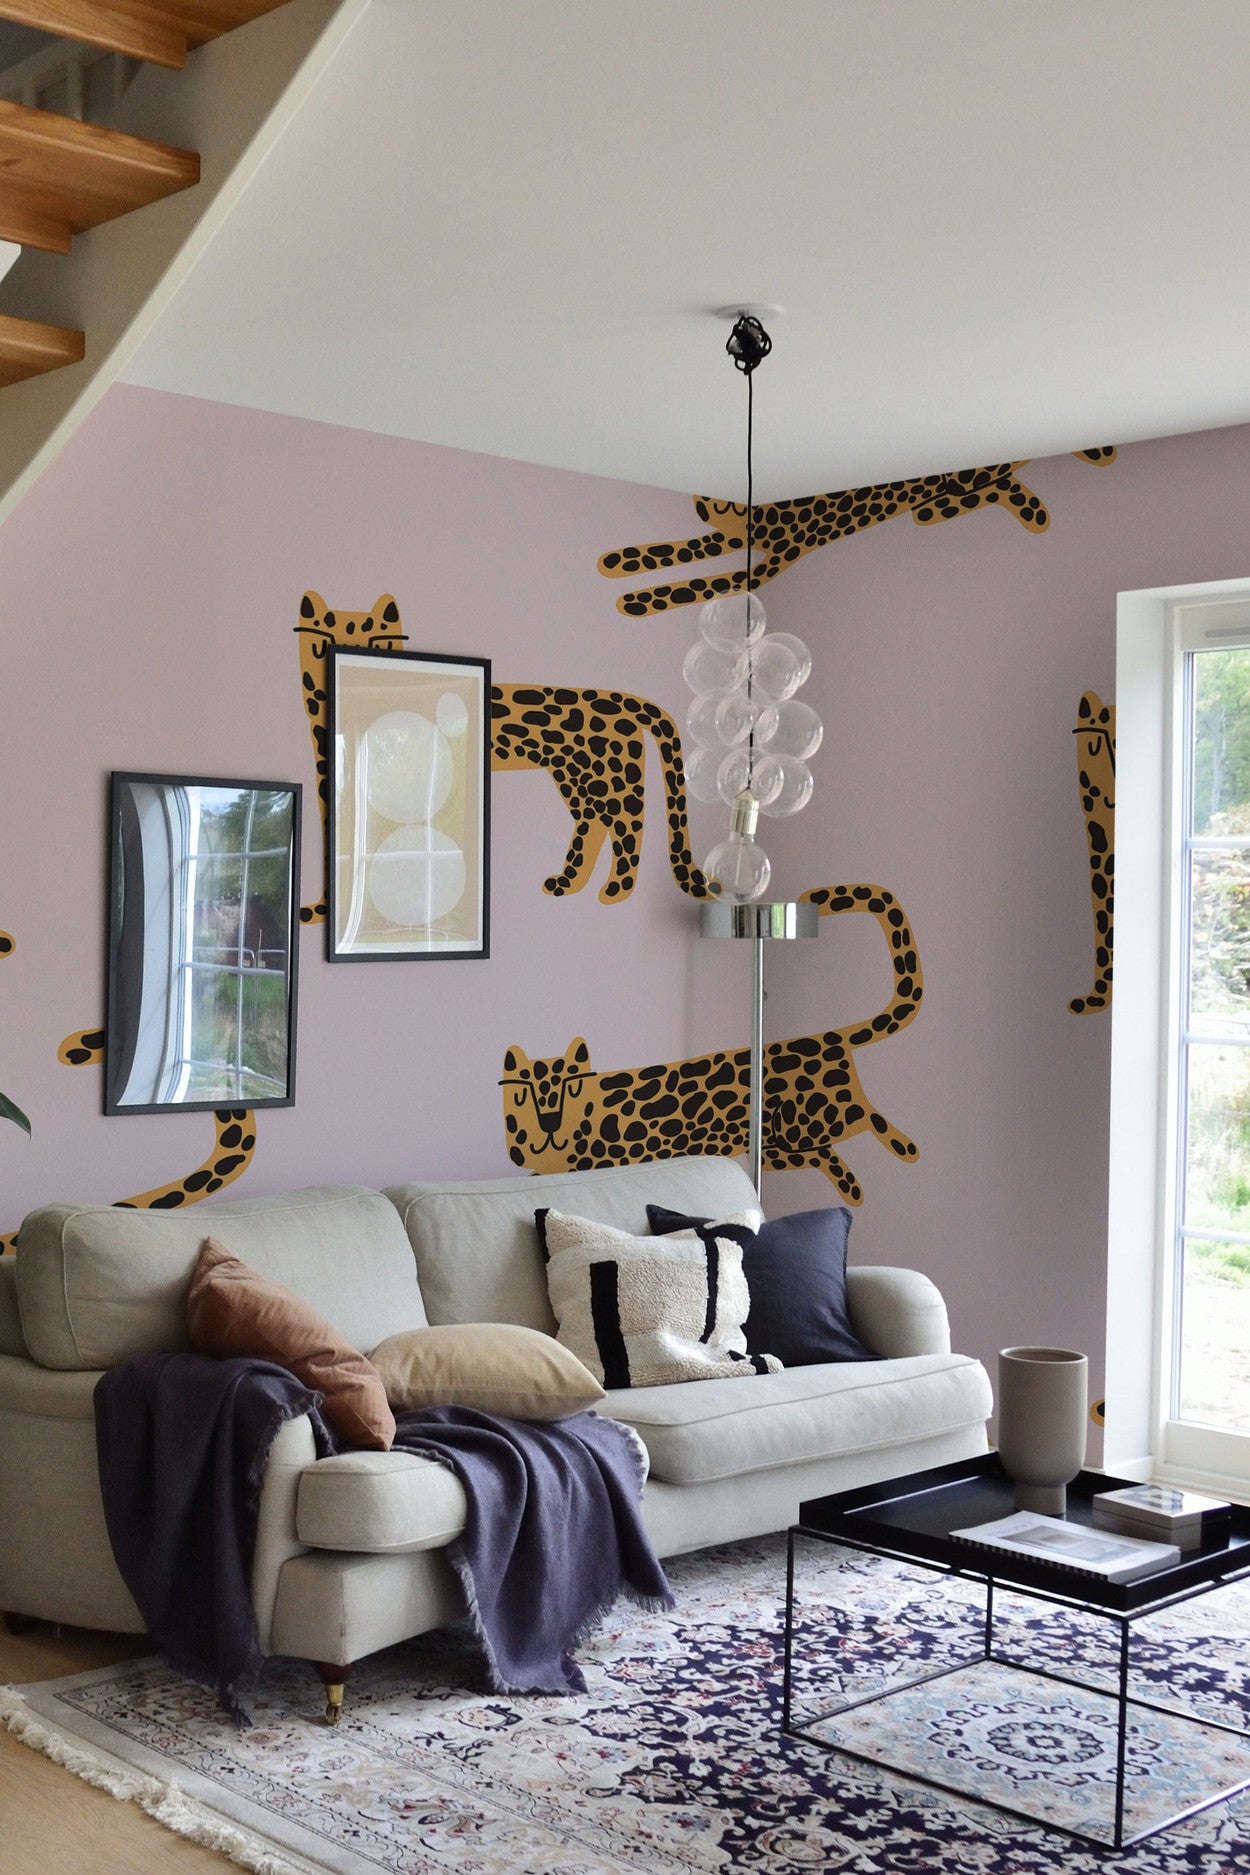 Modern living room interior with a creative wall mural of leopards, featuring a cozy sofa and stylish home decor